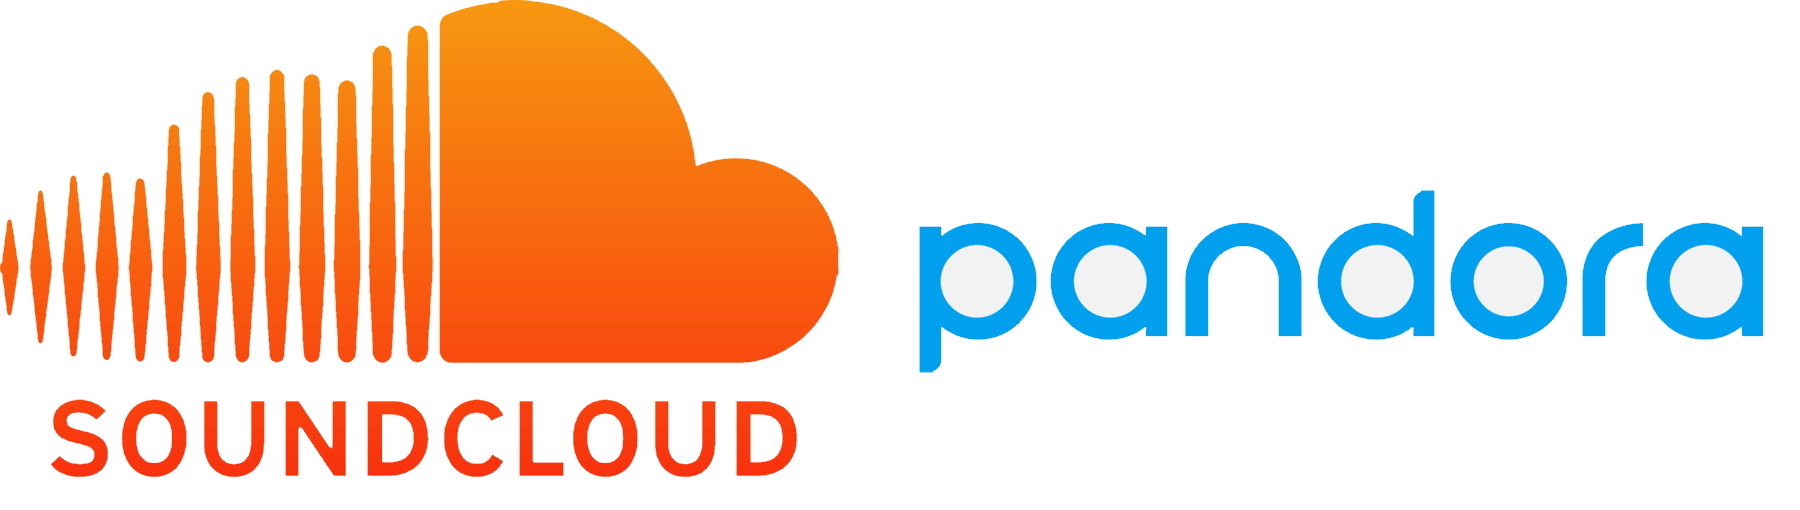 SoundCloud just got investment from SiriusXM the owners of Pandora